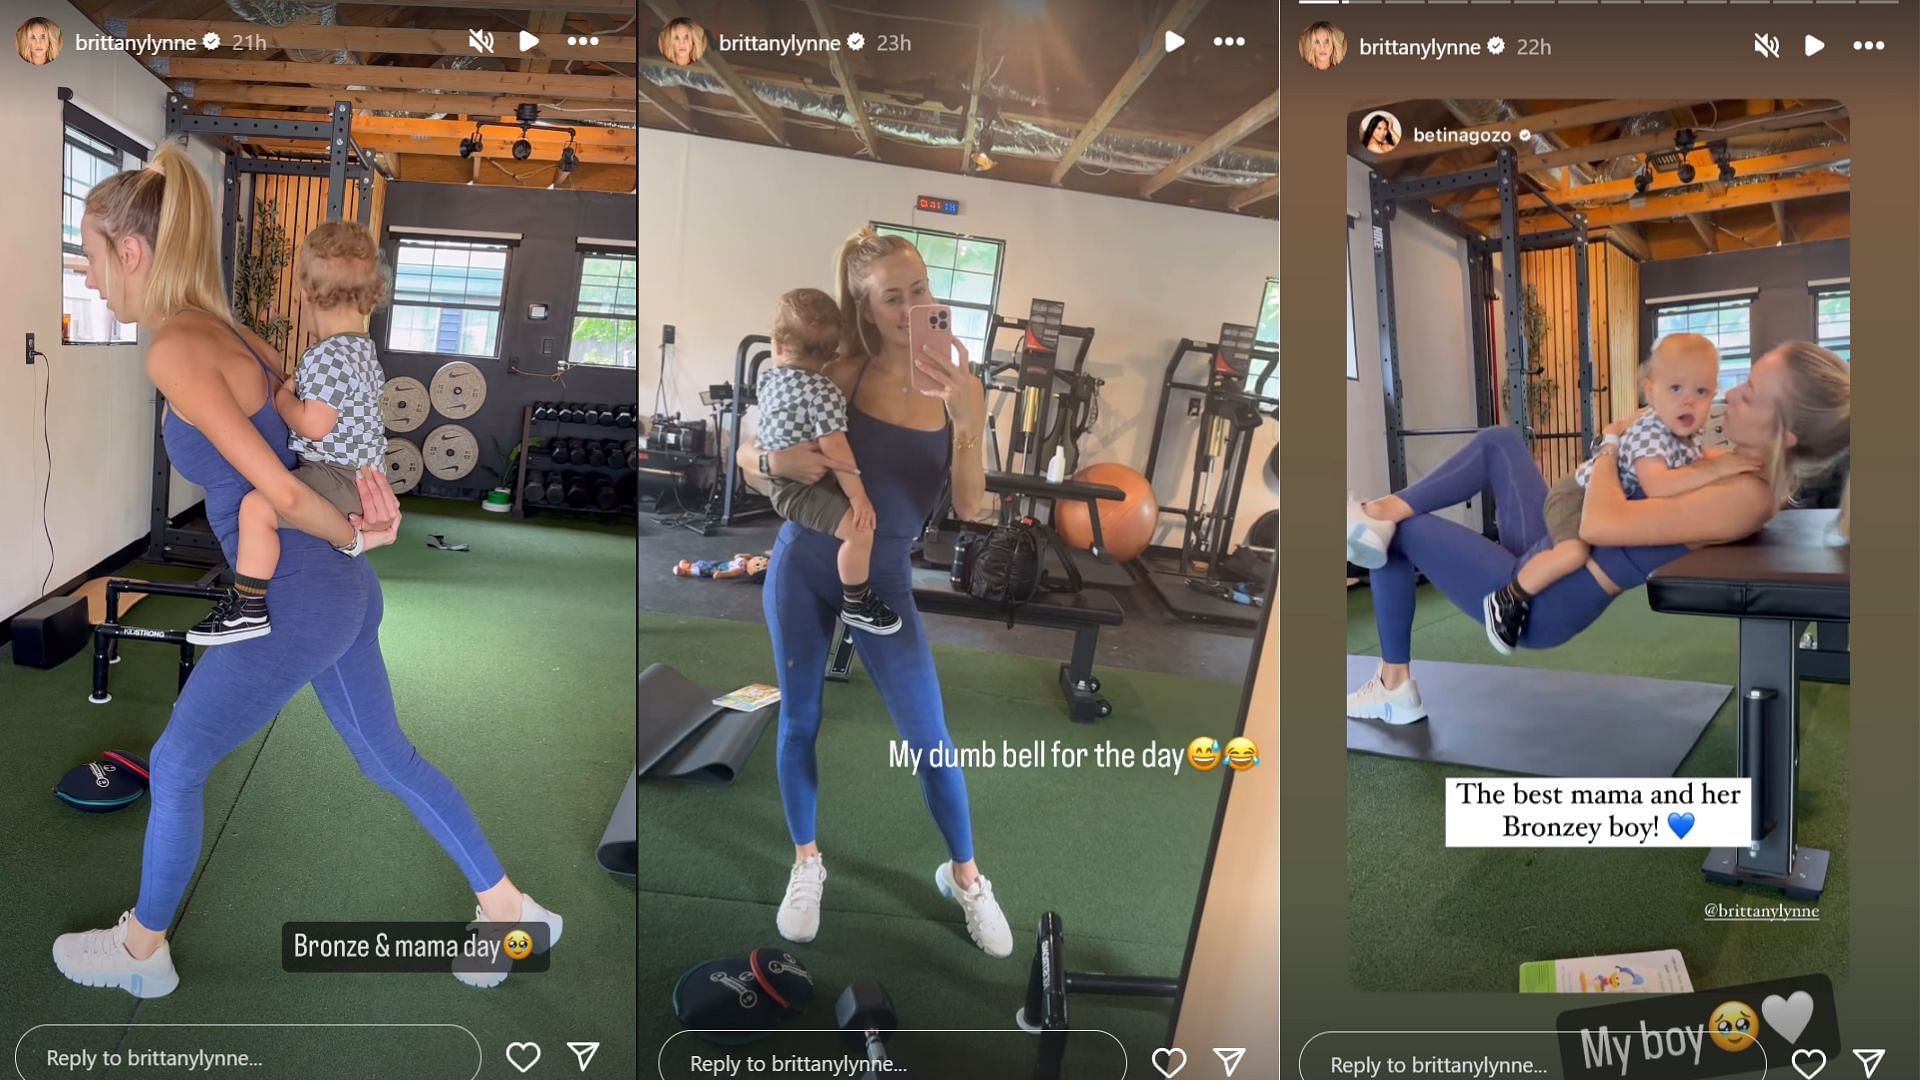 Patrick Mahomes&#039; wife Brittany works out with Bronze (From: @brittanylynne)